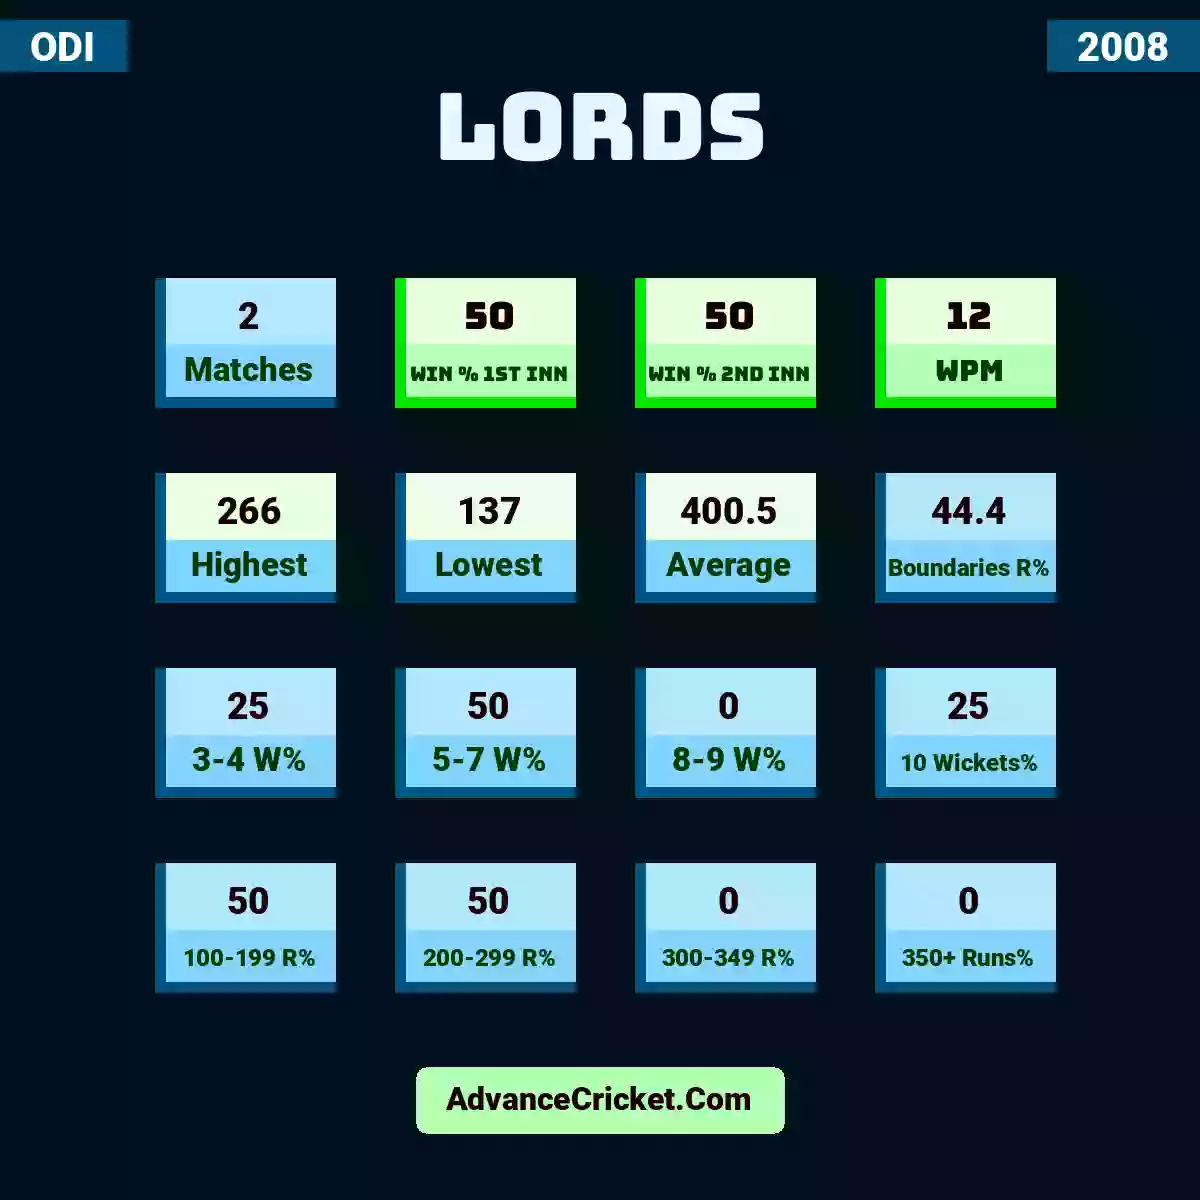 Image showing Lords with Matches: 2, Win % 1st Inn: 50, Win % 2nd Inn: 50, WPM: 12, Highest: 266, Lowest: 137, Average: 400.5, Boundaries R%: 44.4, 3-4 W%: 25, 5-7 W%: 50, 8-9 W%: 0, 10 Wickets%: 25, 100-199 R%: 50, 200-299 R%: 50, 300-349 R%: 0, 350+ Runs%: 0.